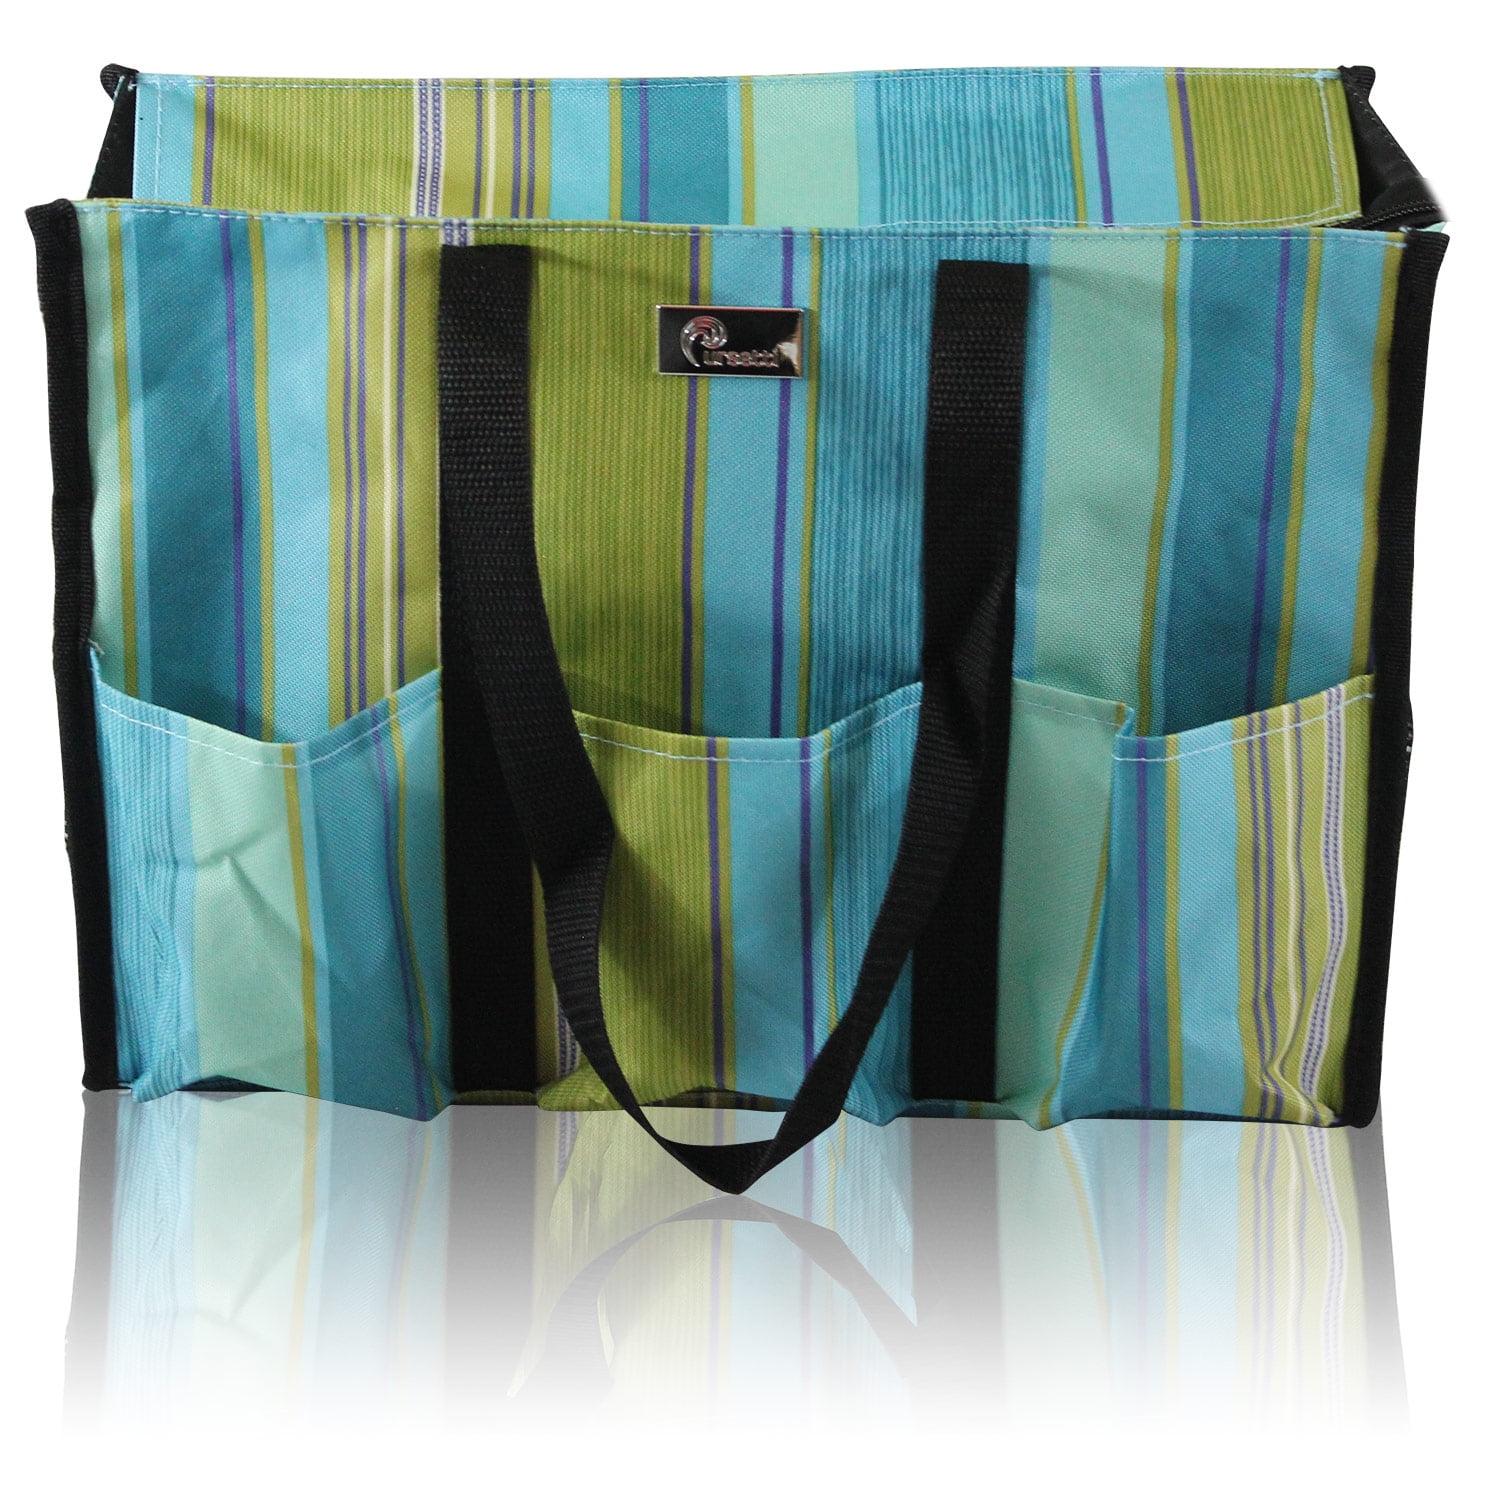 Pursetti Zip-Top Organizing Utility Tote Bag with Multiple Exterior &  Interior Pockets for Working Women, Nurses, Teachers and Soccer Moms (Teal  Stripes) 